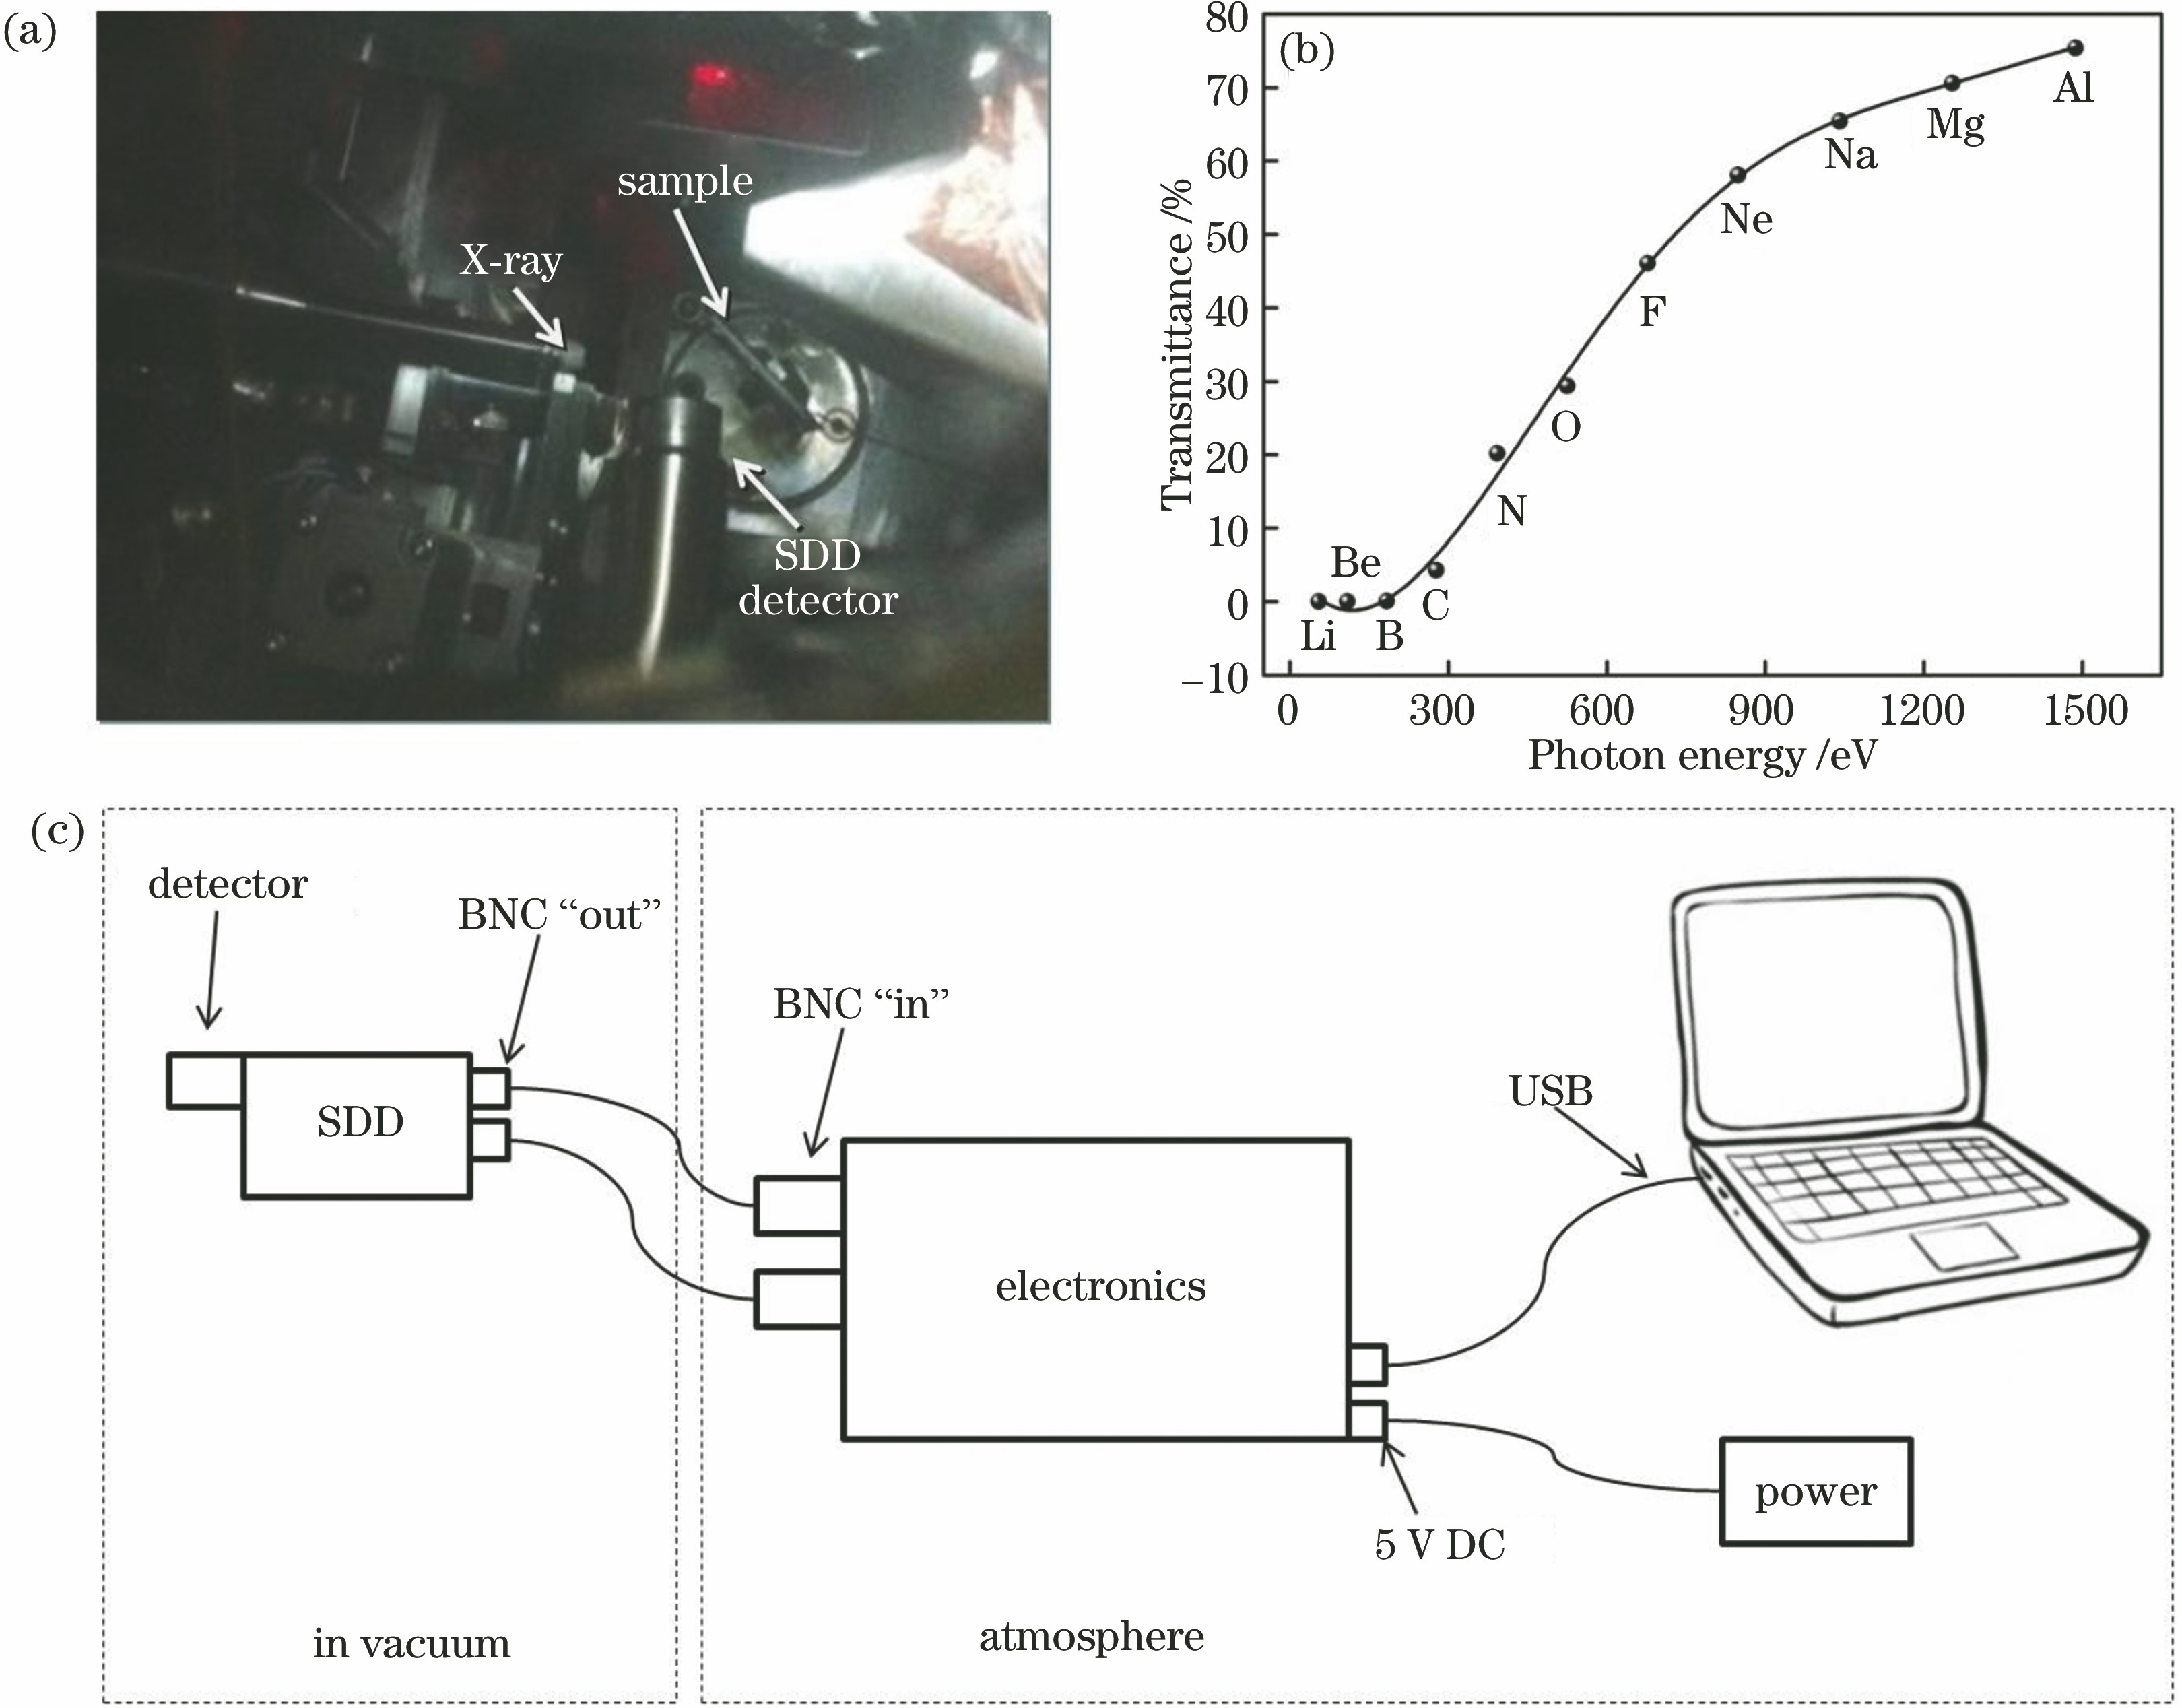 Construction of experimental chamber, transmittance of detector window and schematic of fluorescence measurement system. (a) Internal structure of chamber; (b) theoretical transmittance of silicon nitride window; (c) schematic of the soft X-ray fluorescence measurement system